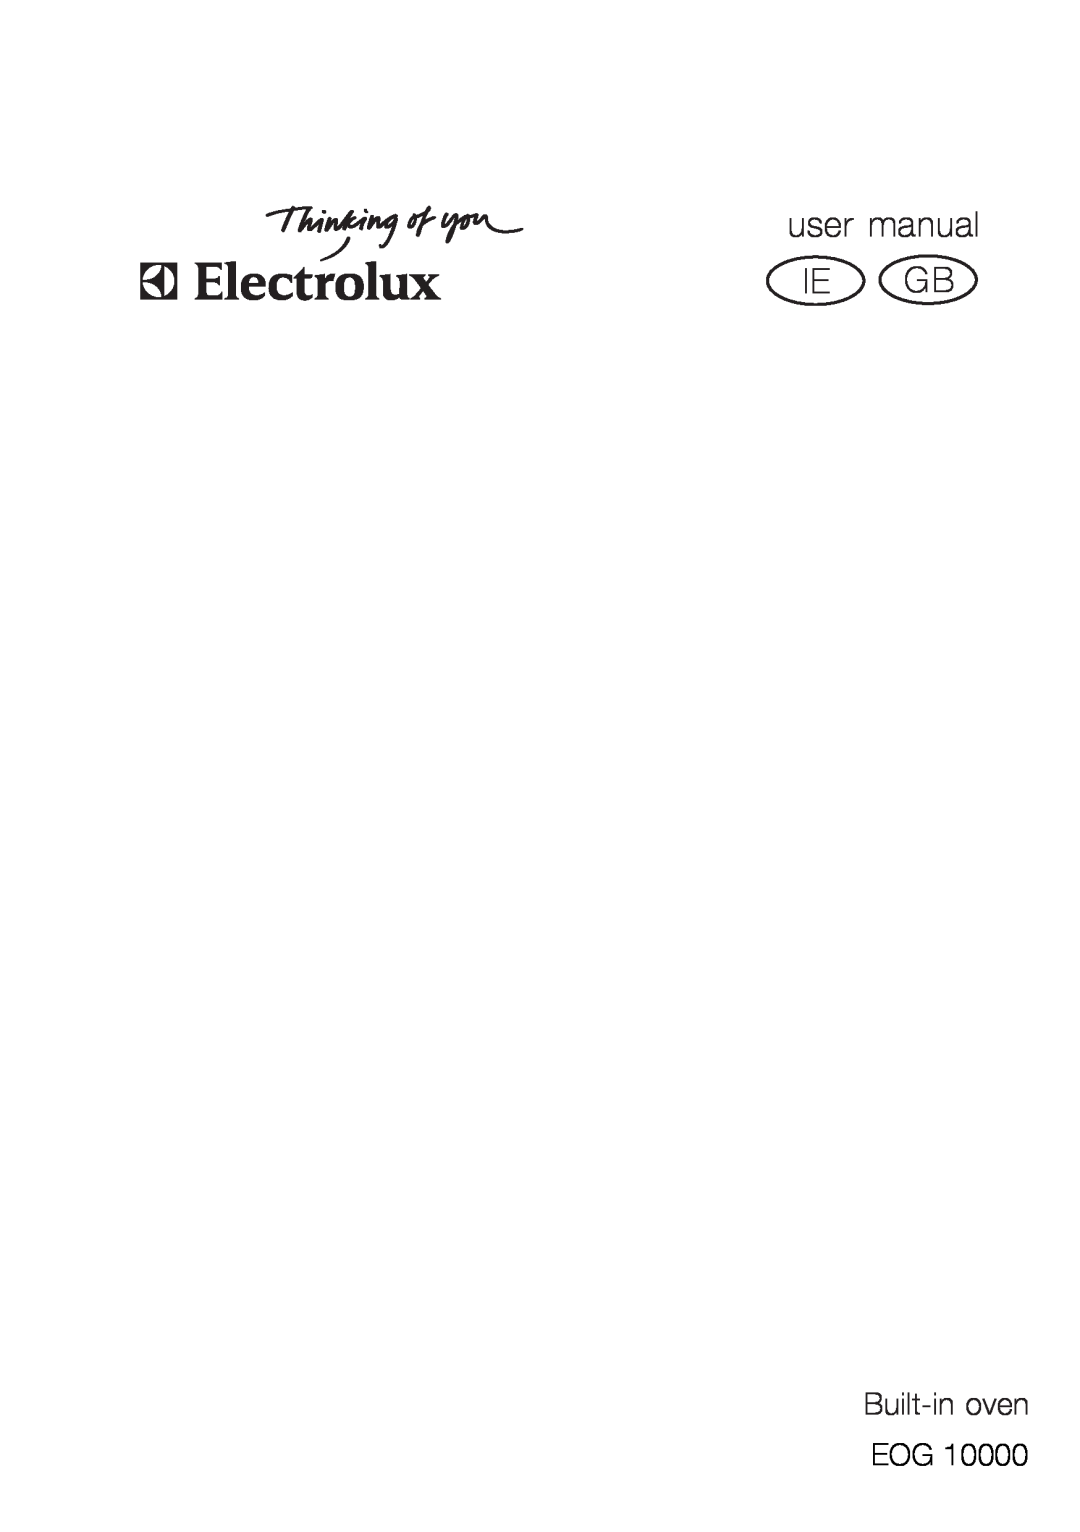 Electrolux EOG 10000 user manual user manual IE GB, Built-in oven 